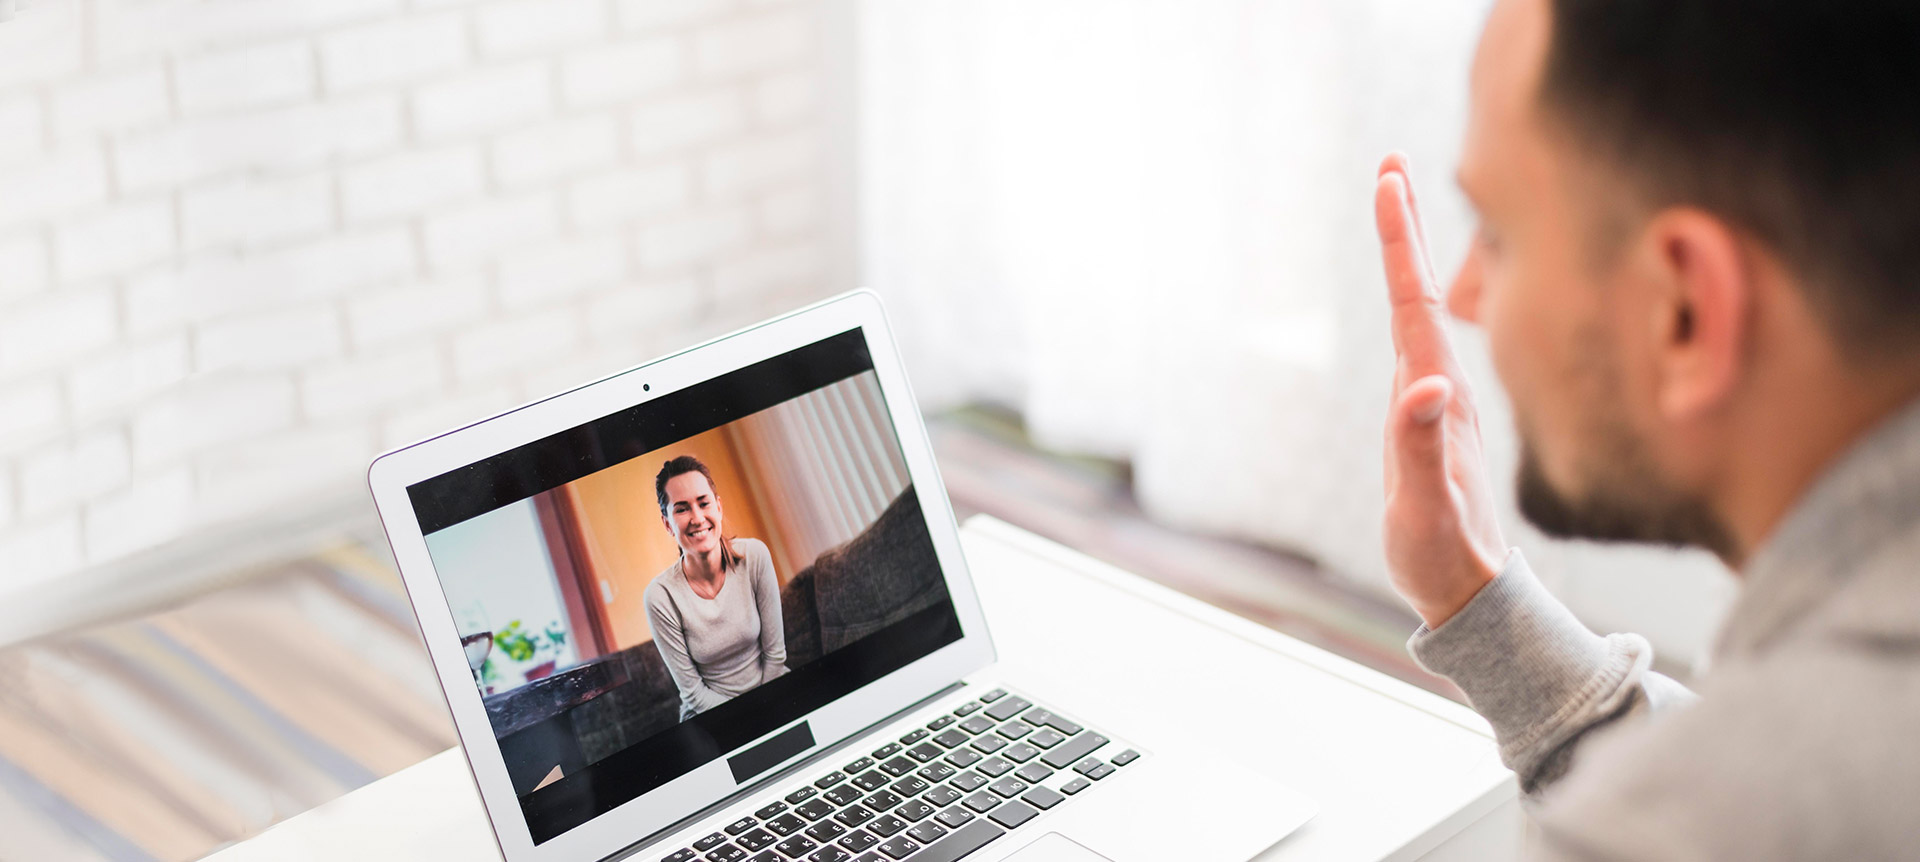 5 Best Practices For a Smoother Video Interviewing Process